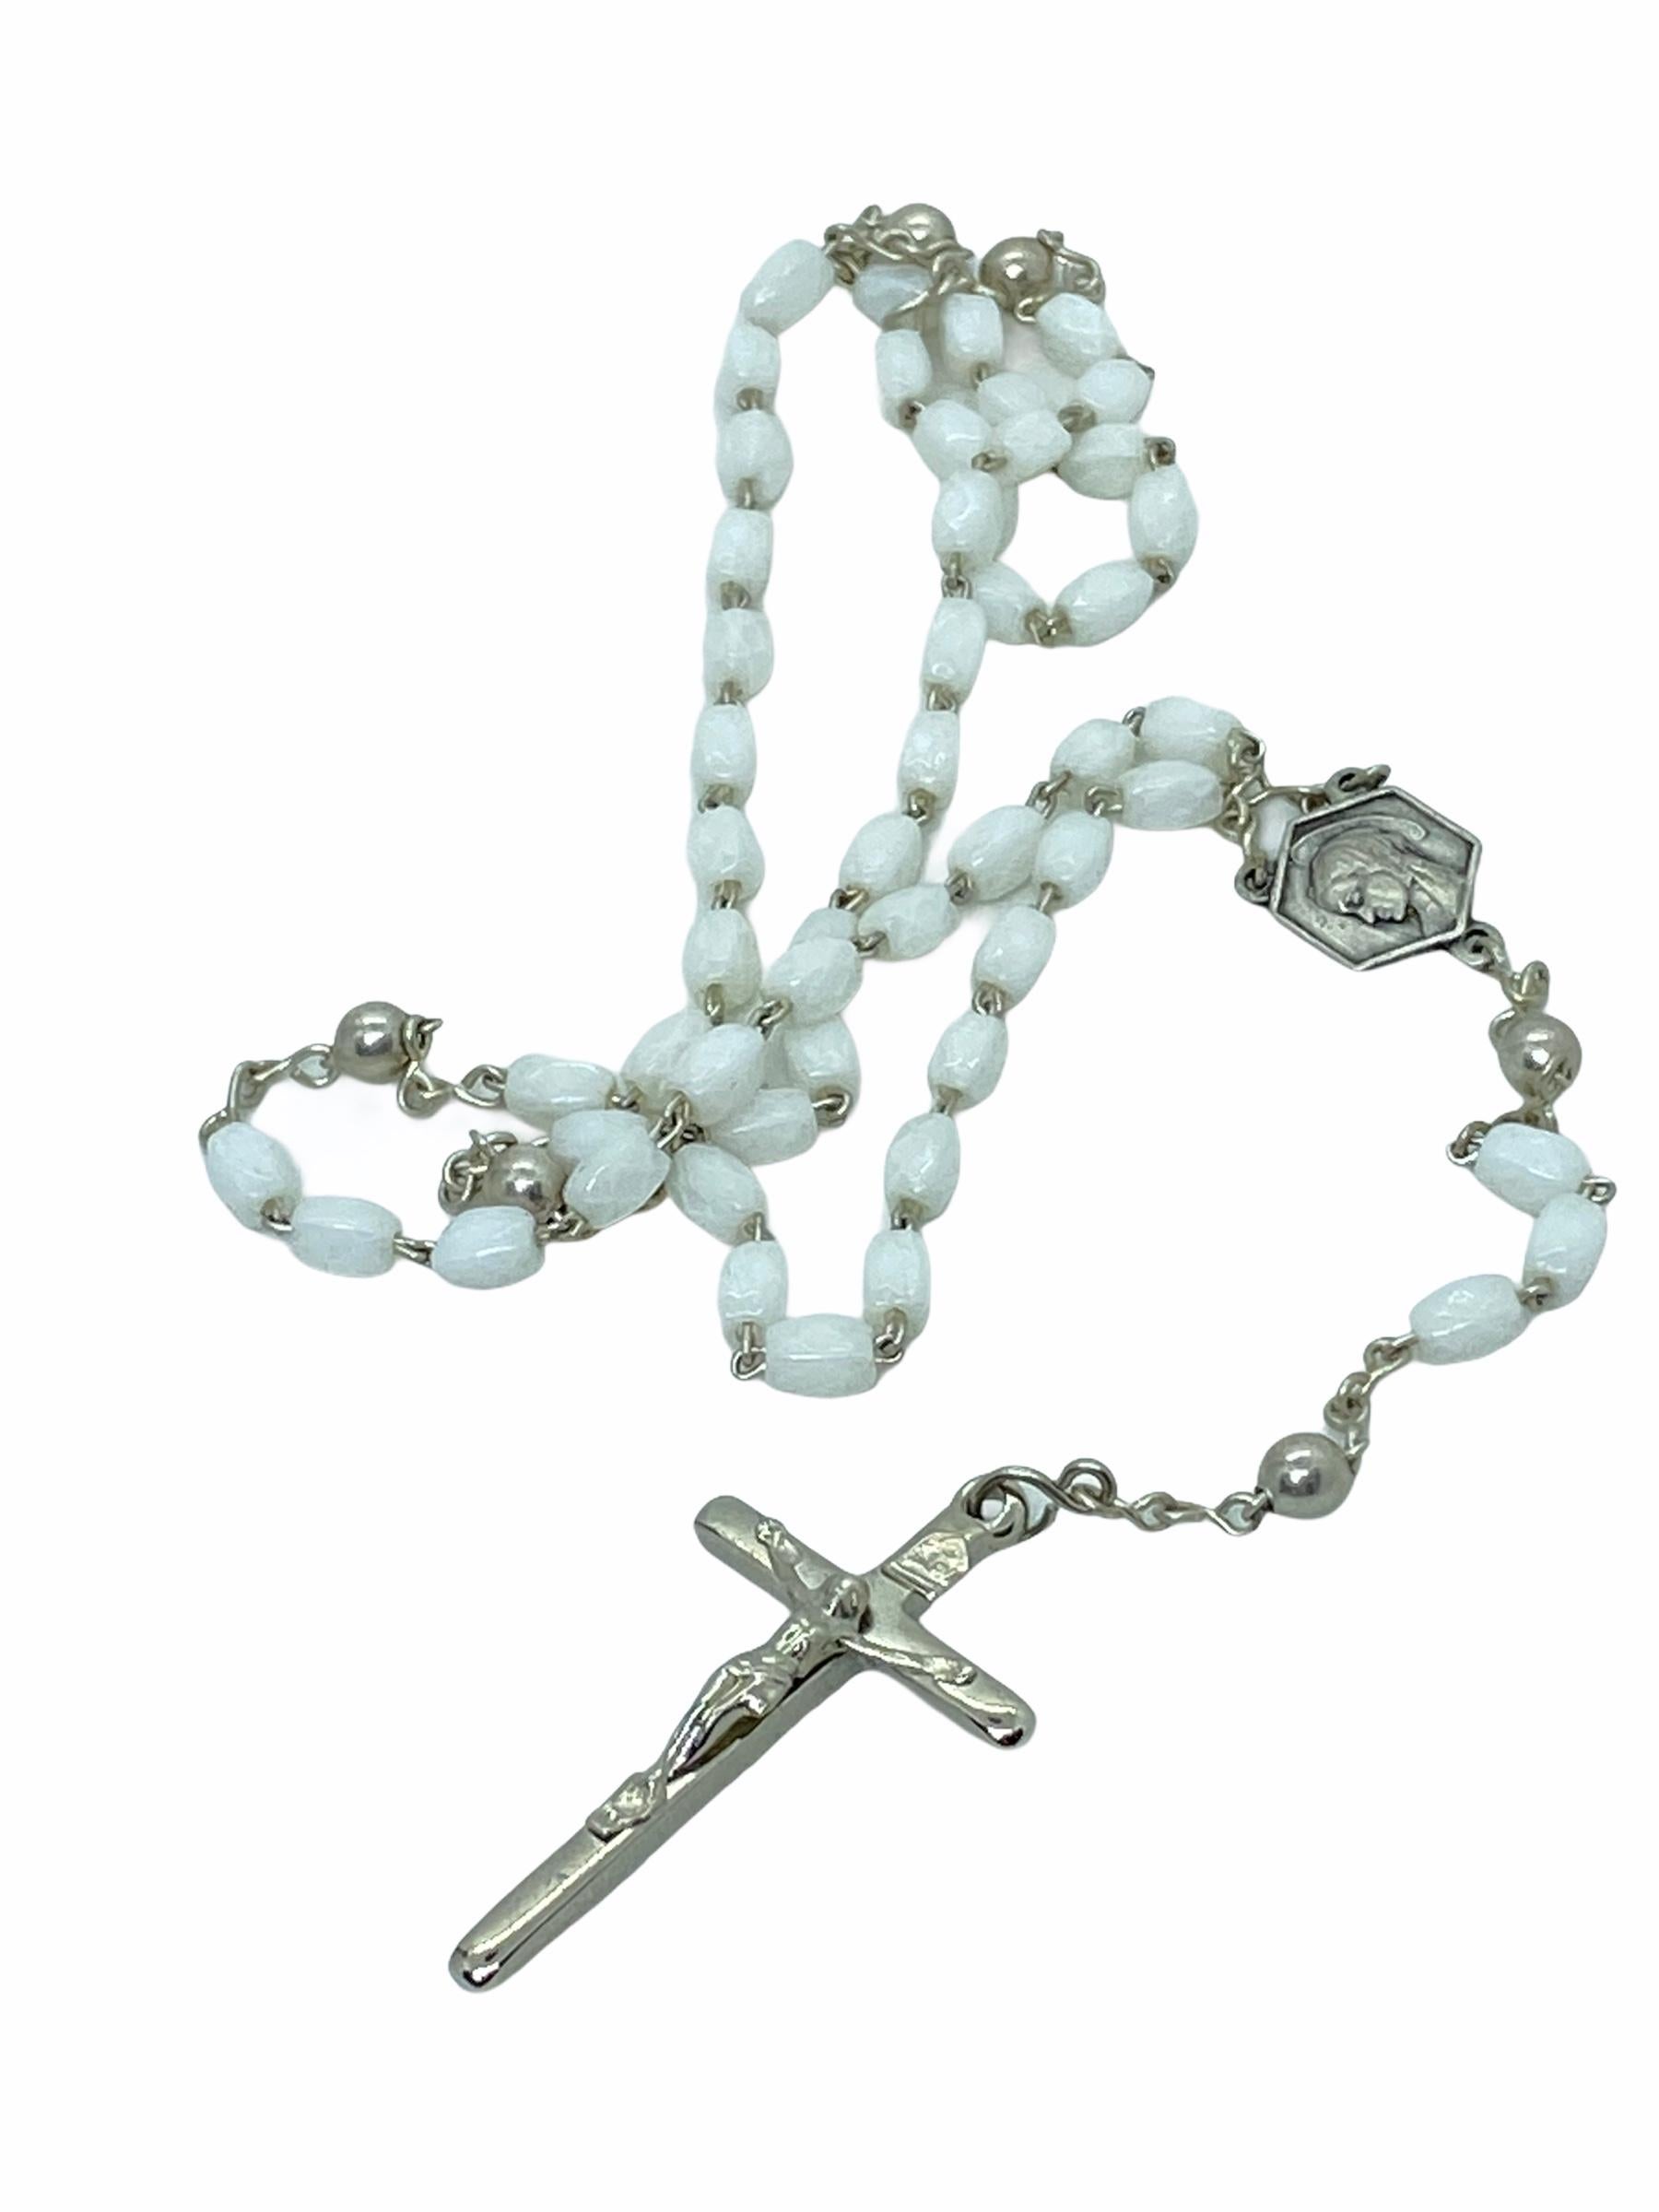 Silvered Vintage Catholic Rosary in Silver Tin Box from Lourdes, France